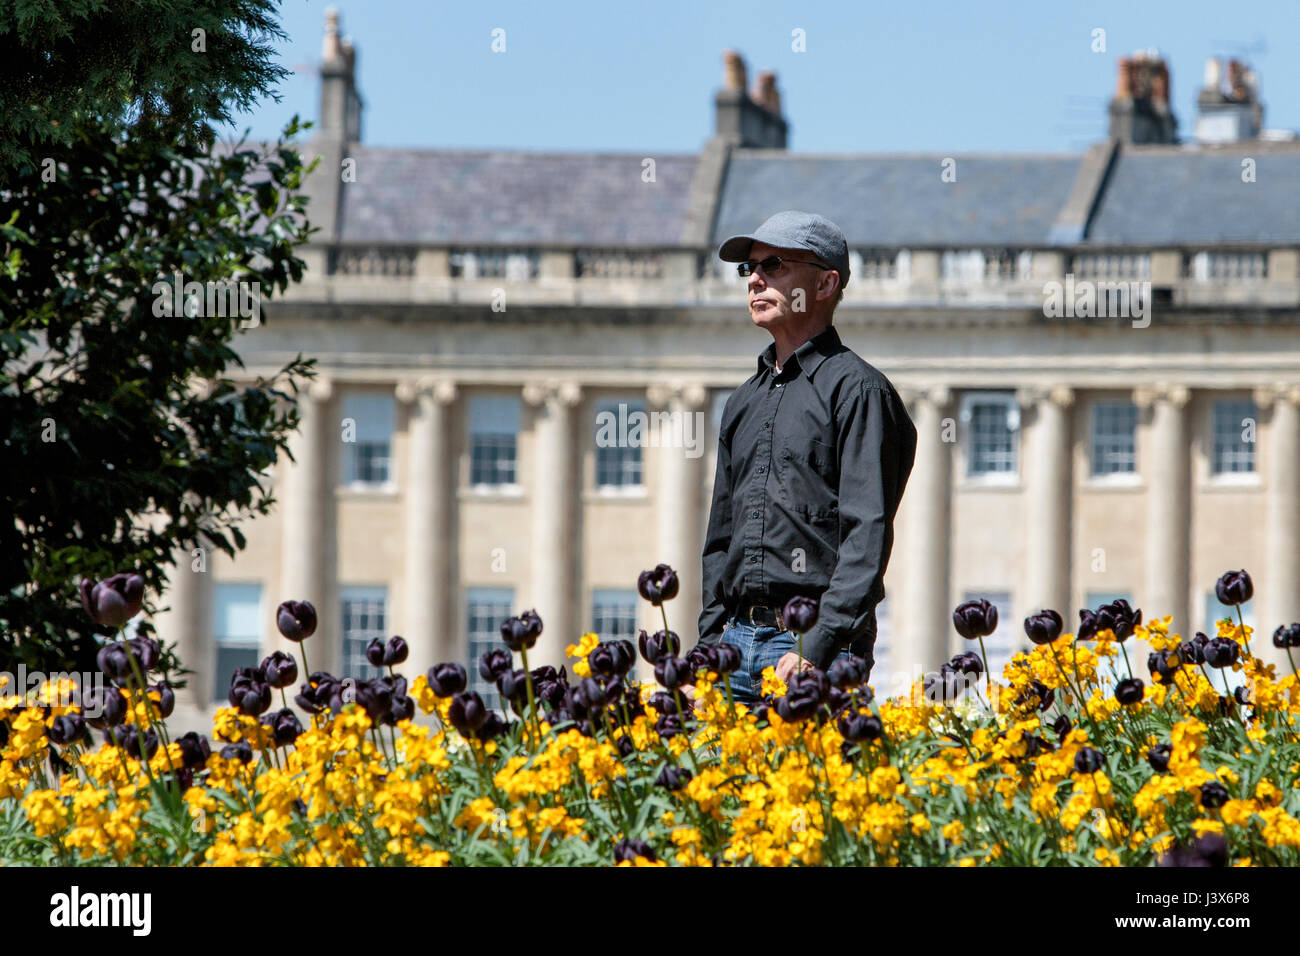 Bath, UK. 8th May, 2017. UK Weather. With the world famous Royal Crescent in the background, a man enjoying the warm sunshine is pictured as he walks past colourful flower displays in Royal Victoria park. Credit: lynchpics/Alamy Live News Stock Photo